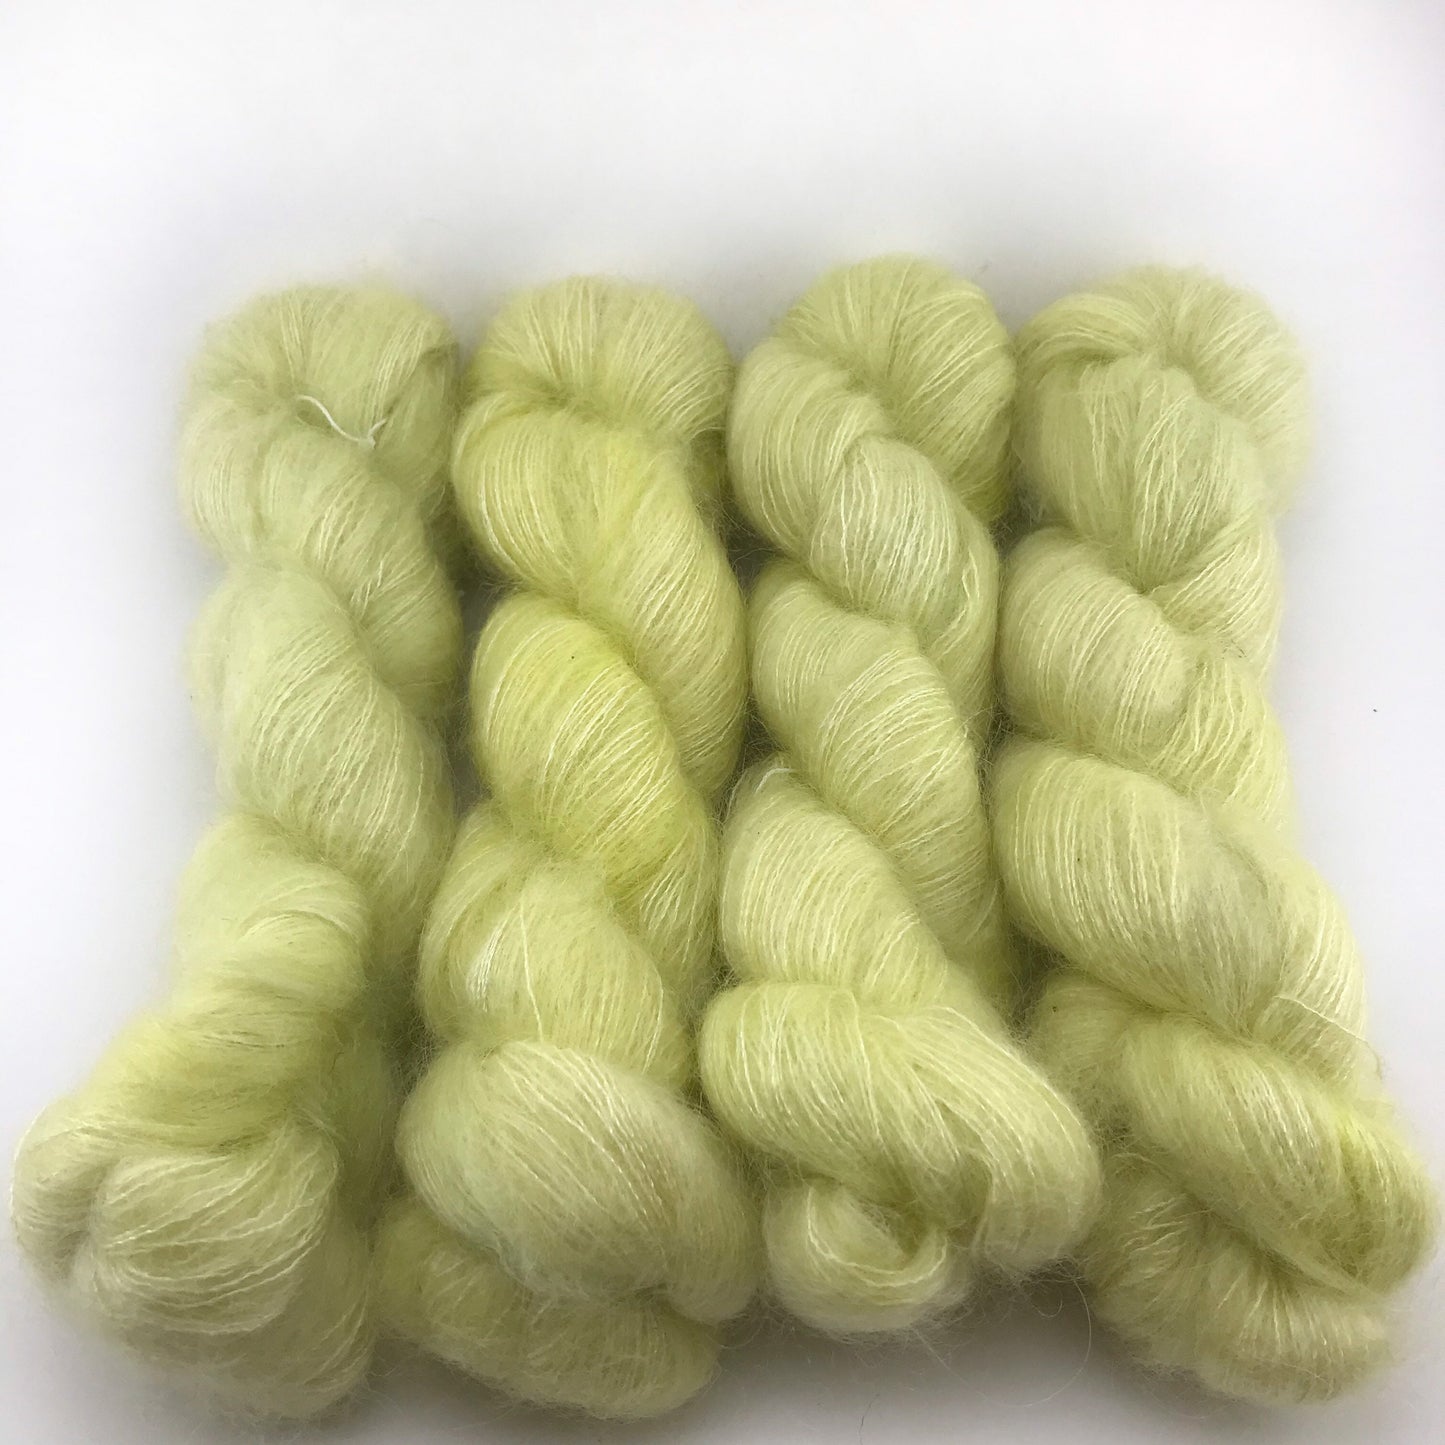 GLOWBUG - Yellow Green Neon Lace Weight Mohair